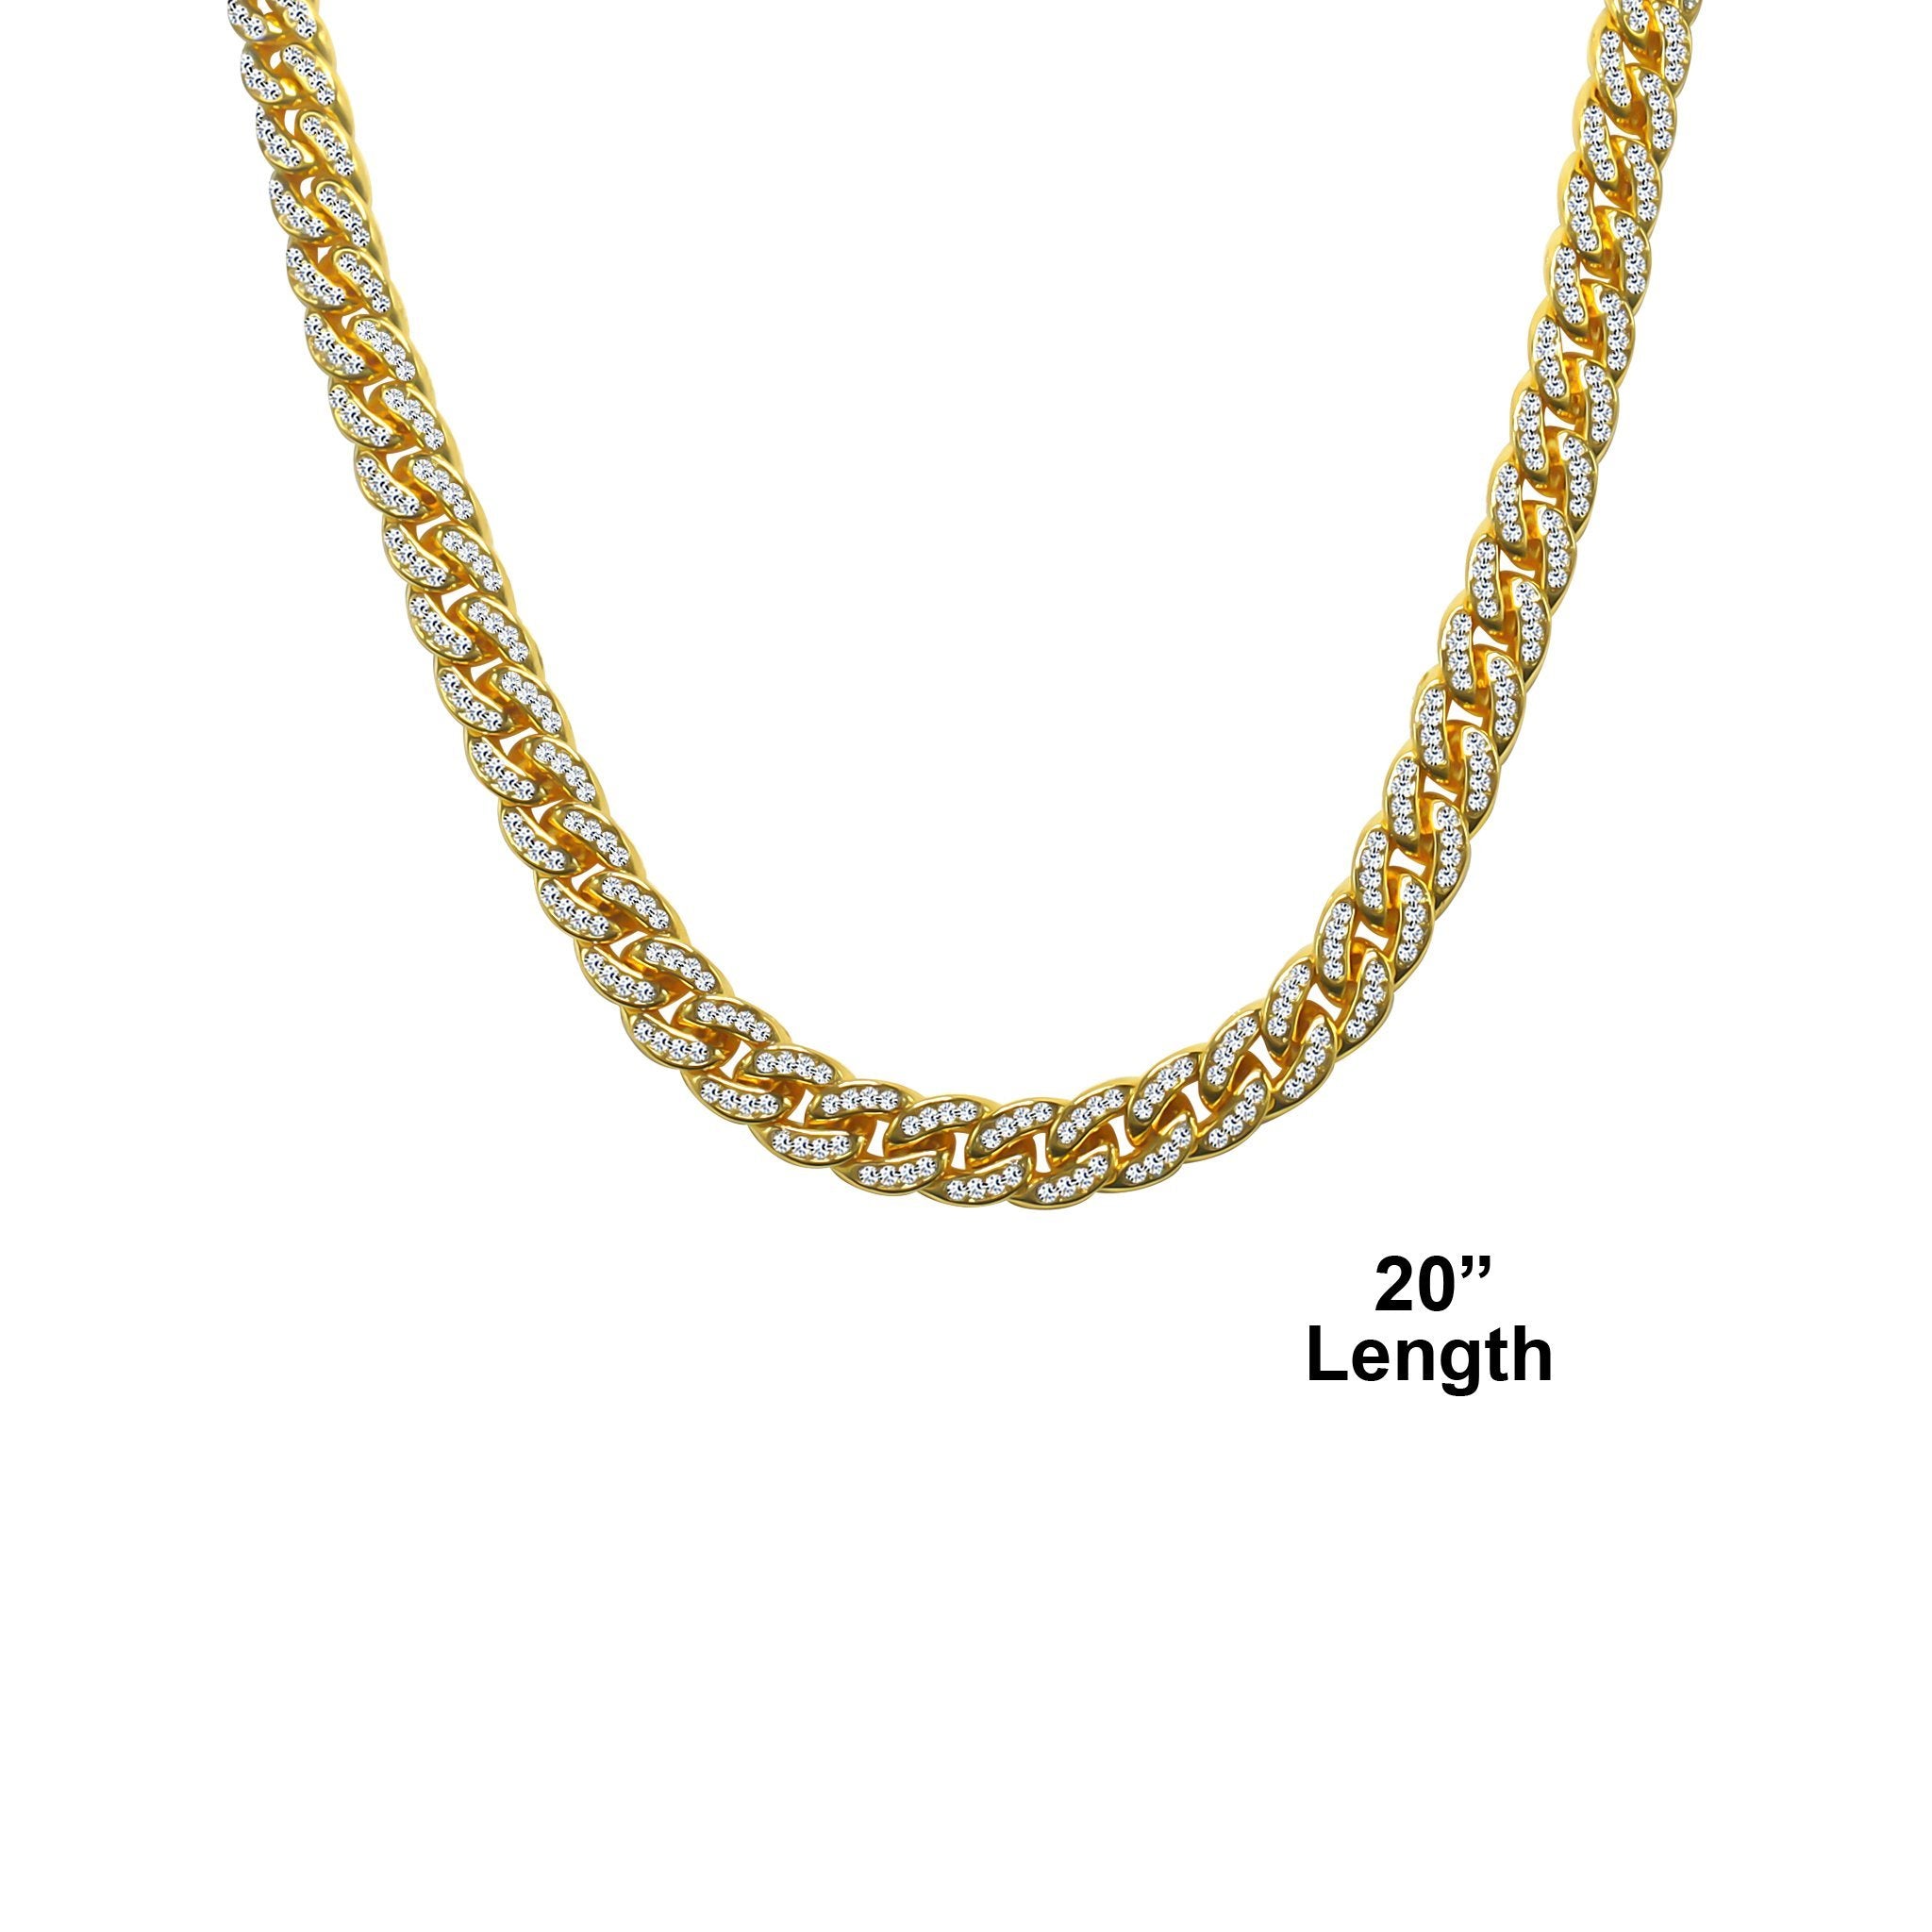 BRASS-CUBAN-CHAIN-WITH-CRYSTAL-STONE- GOLD 20''- 970732